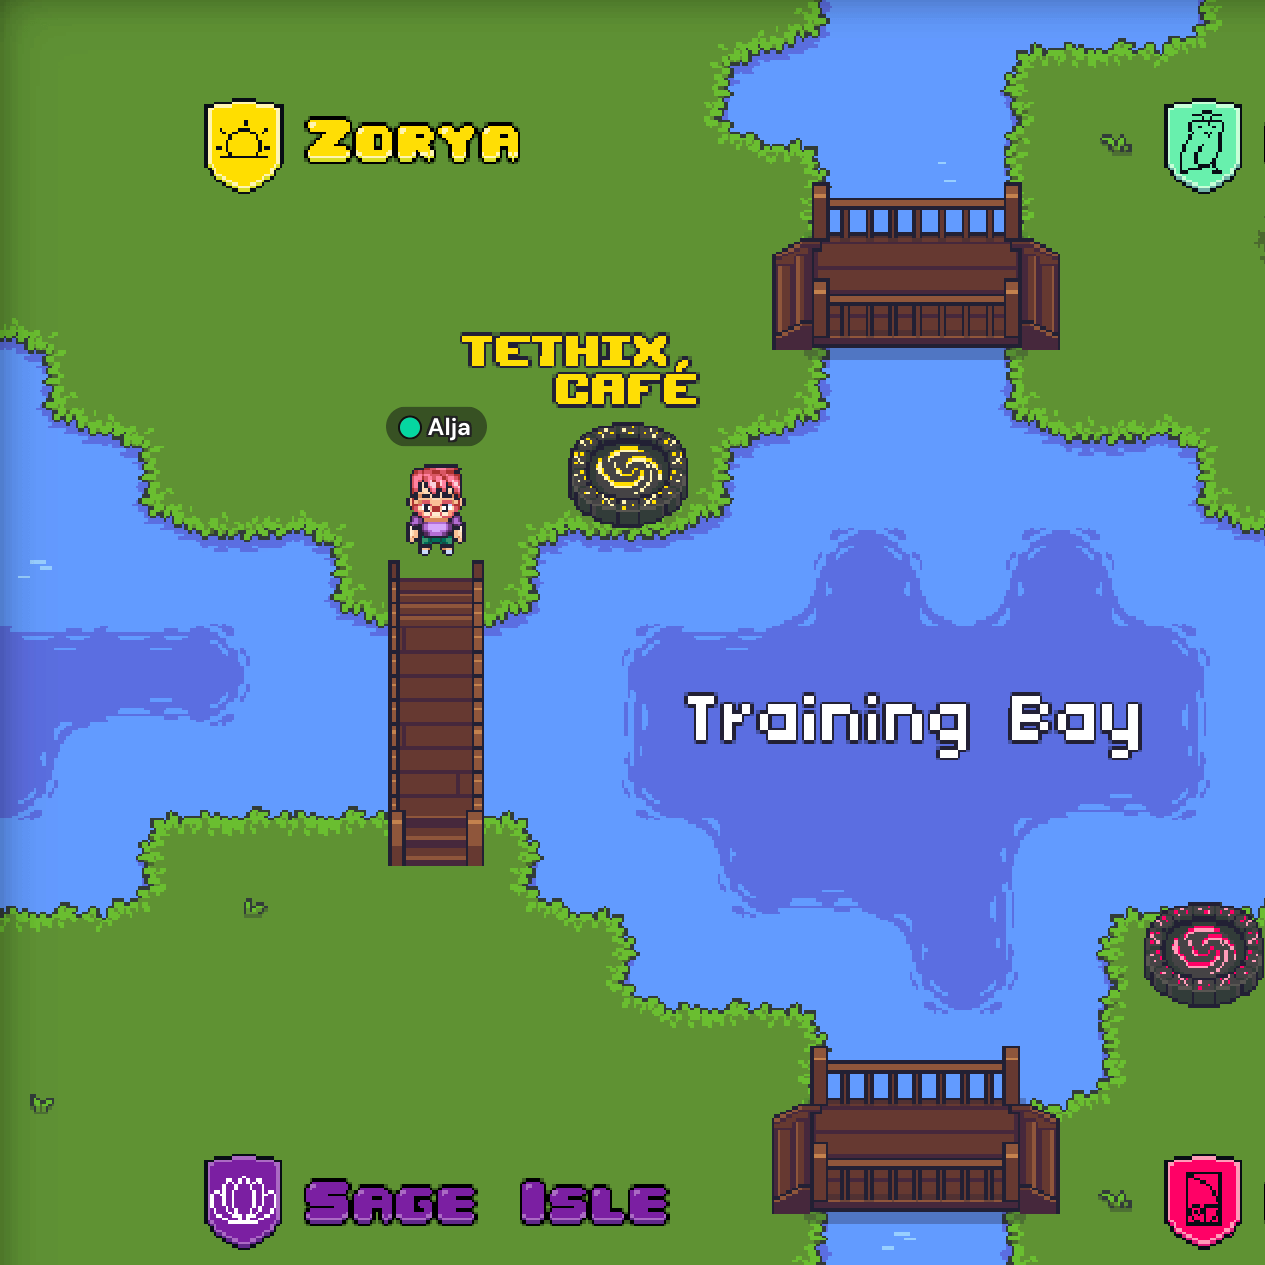 Screenshot of a pixel 2D world showing islands in Training Bay, with Alja's avatar standing in front of a bridge connecting the islands.